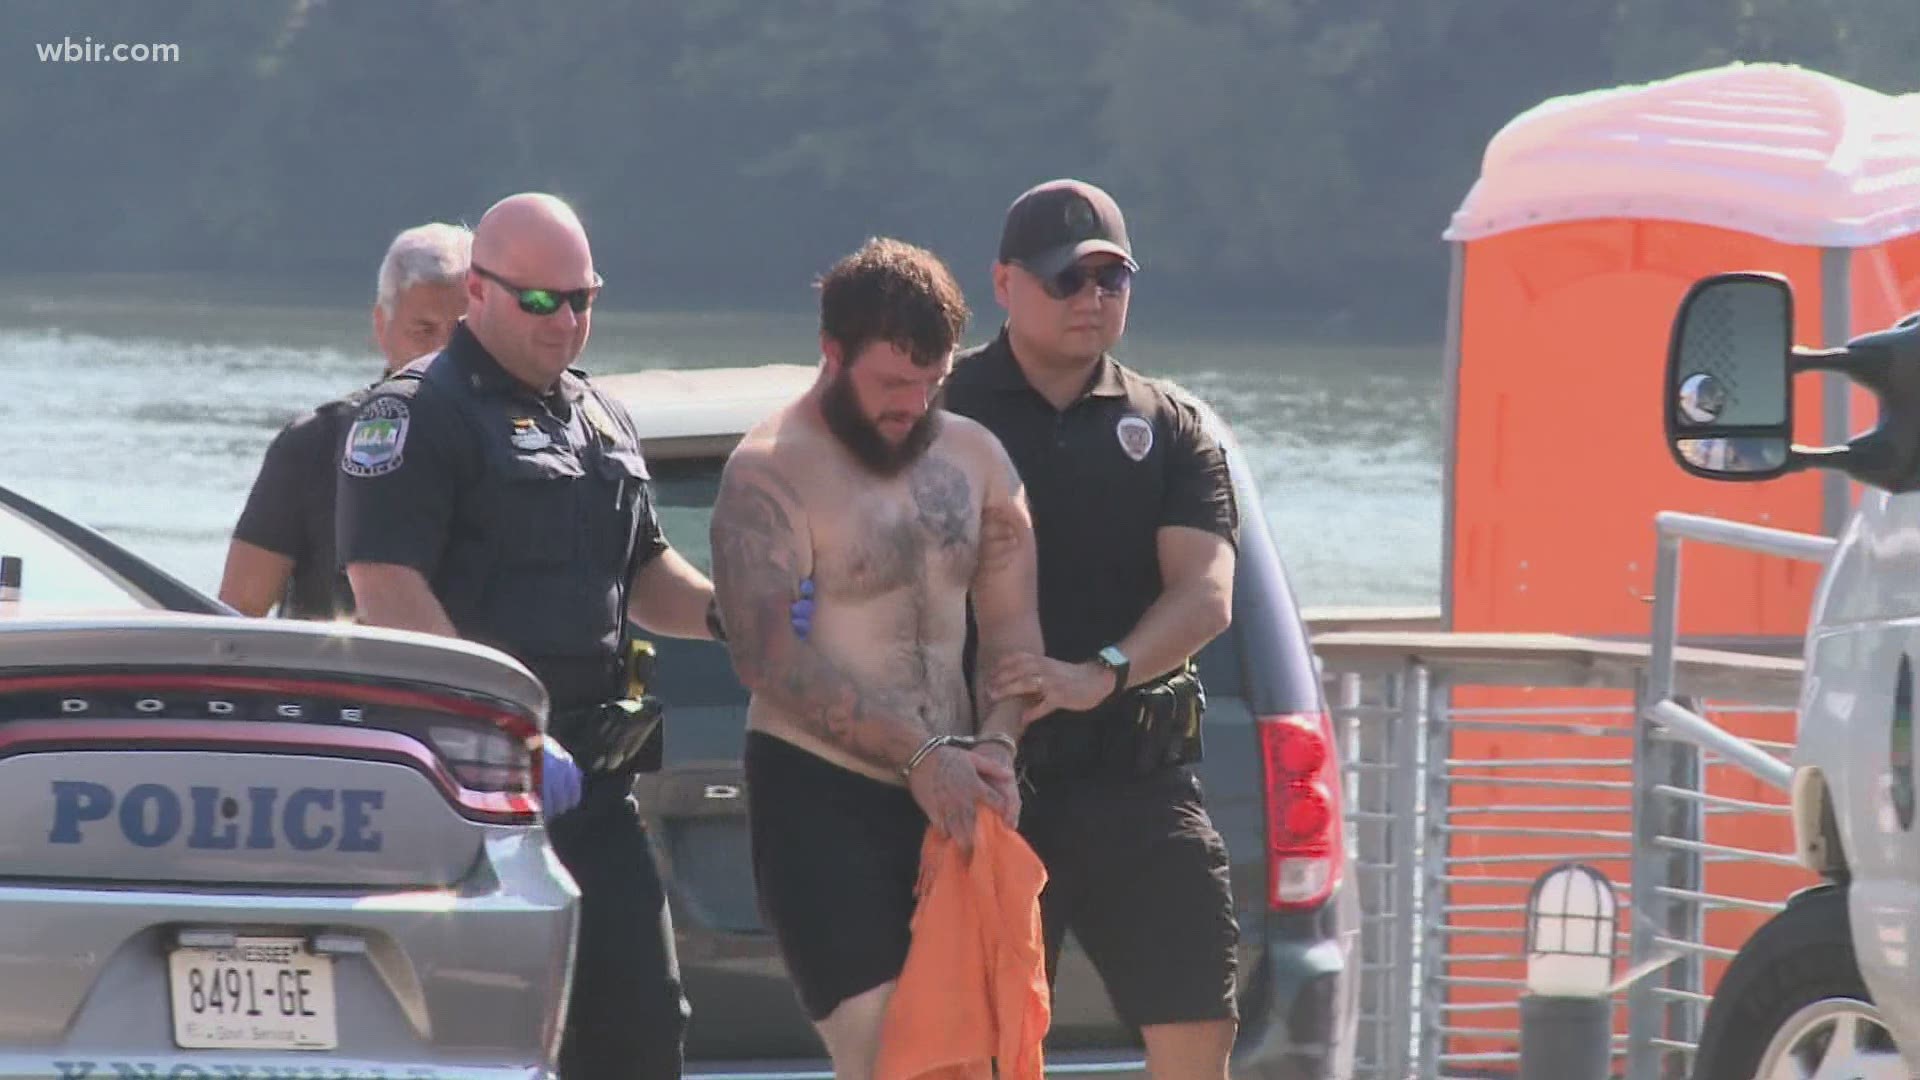 Police said the suspect jumped into the Tennessee River to try and escape them following a failed attempt to steal a boat.